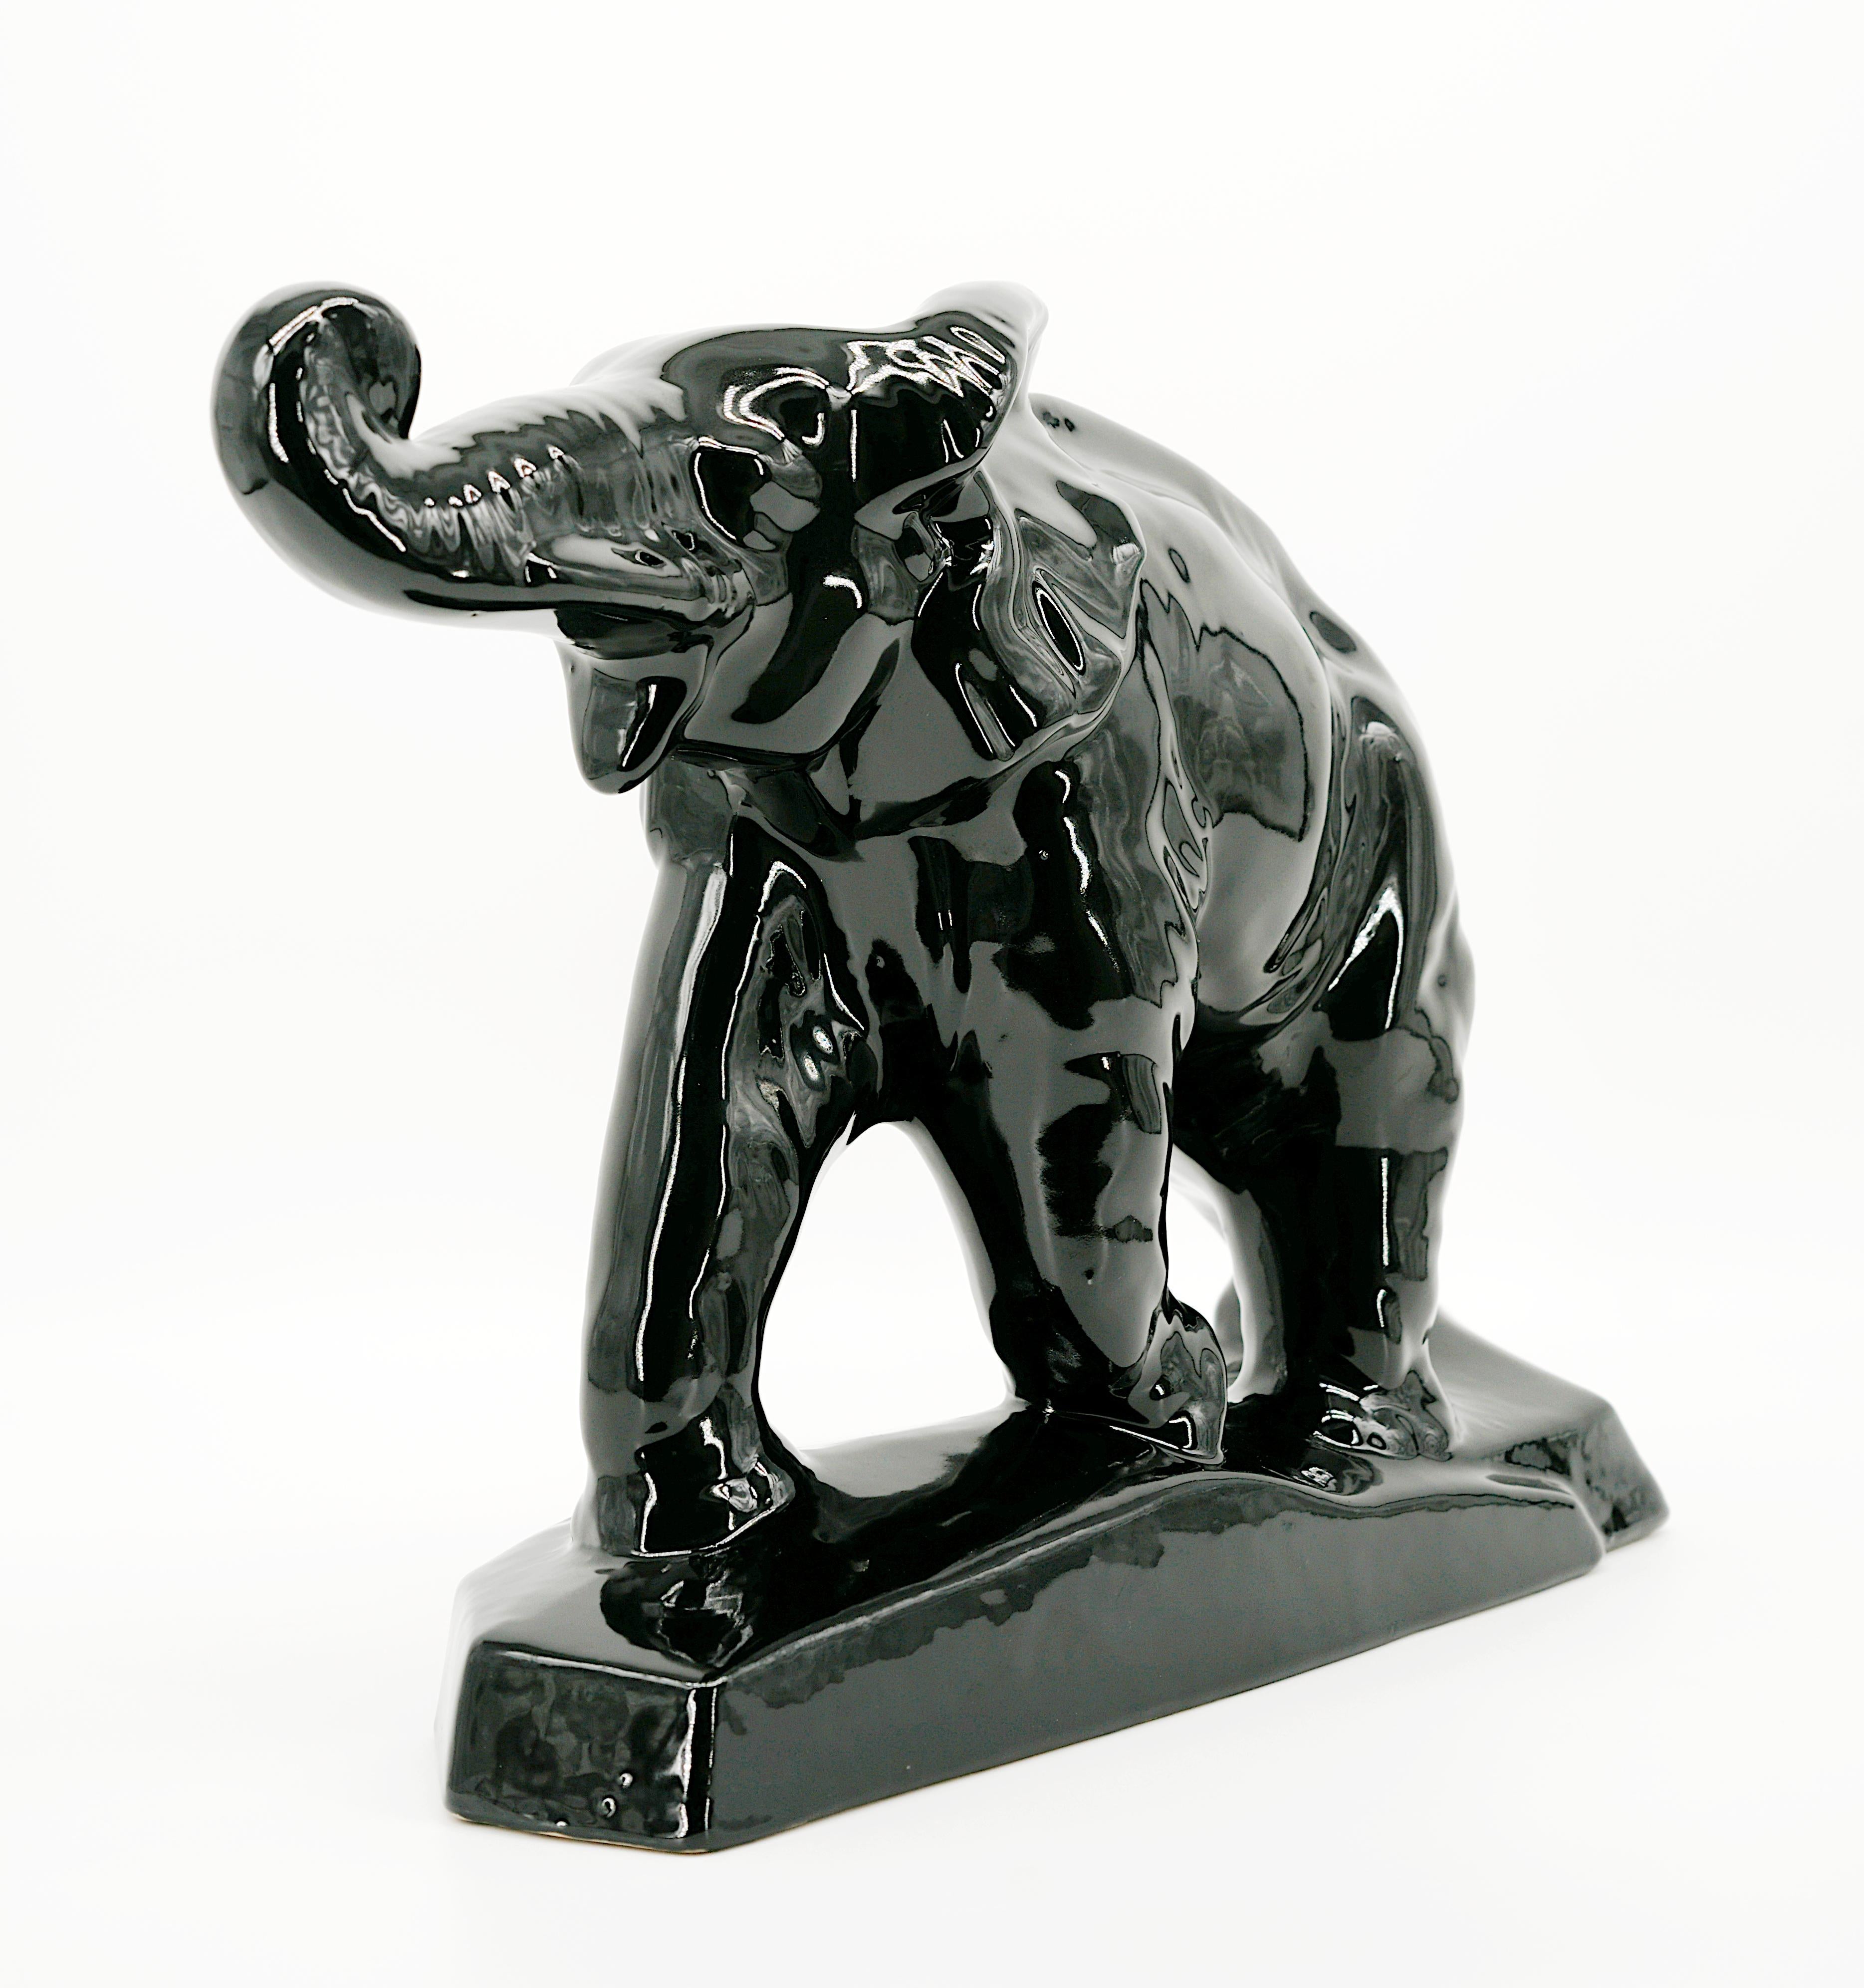 French Art Deco glazed black ceramic elephant statue by Charles LEMANCEAU at Saint-Clement, France, 1930s. Width: 17.1